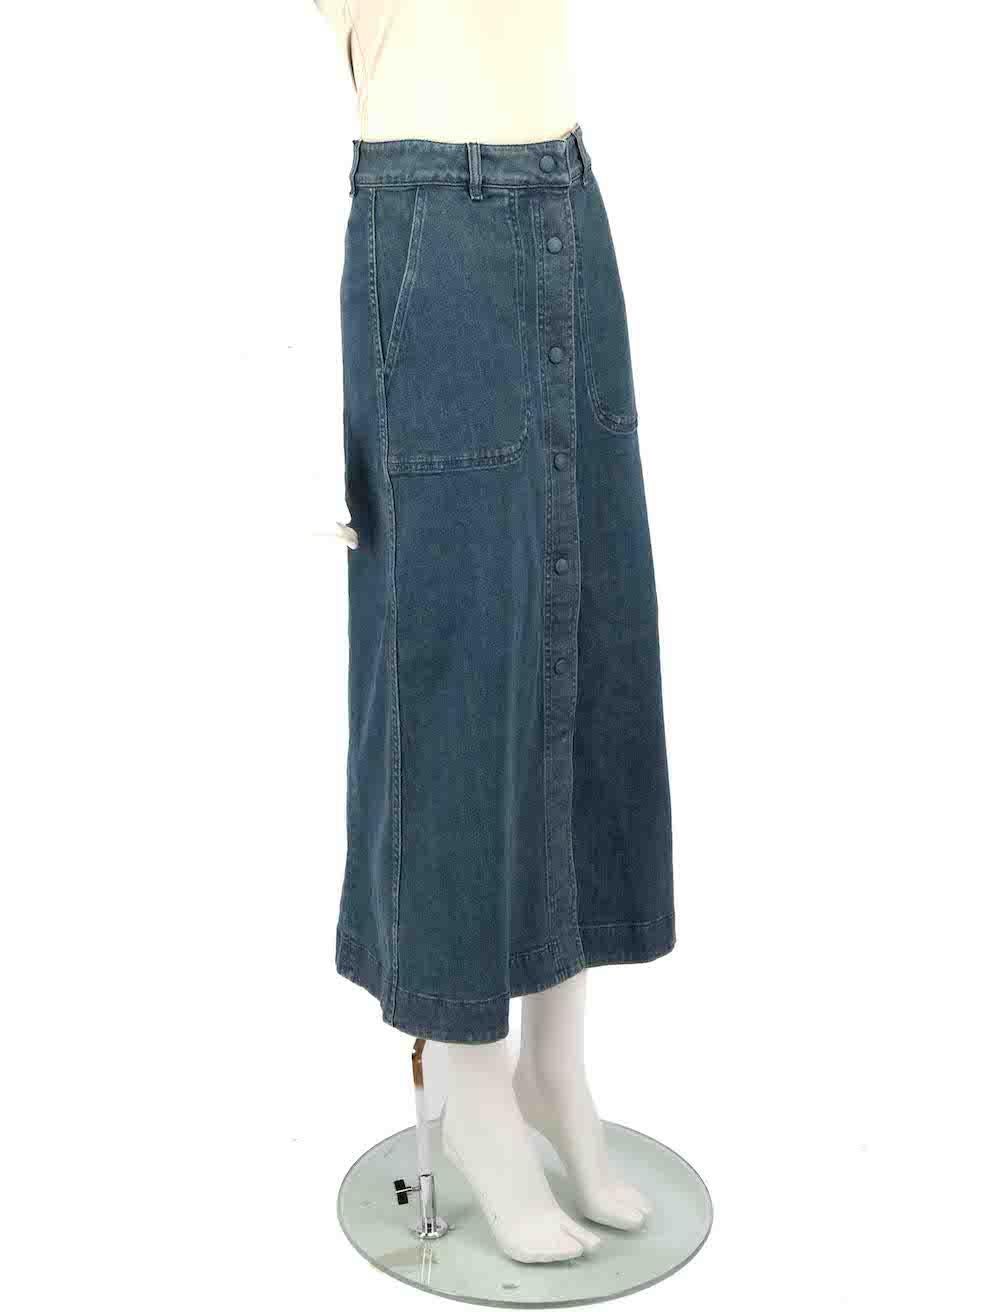 CONDITION is Very good. Minimal wear to the skirt is evident. Minimal wear to the hemline of the skirt is seen with discolouration marks on this used Chloé designer resale item.
 
 
 
 Details
 
 
 Blue
 
 Denim
 
 Skirt
 
 Midi
 
 Front snap button